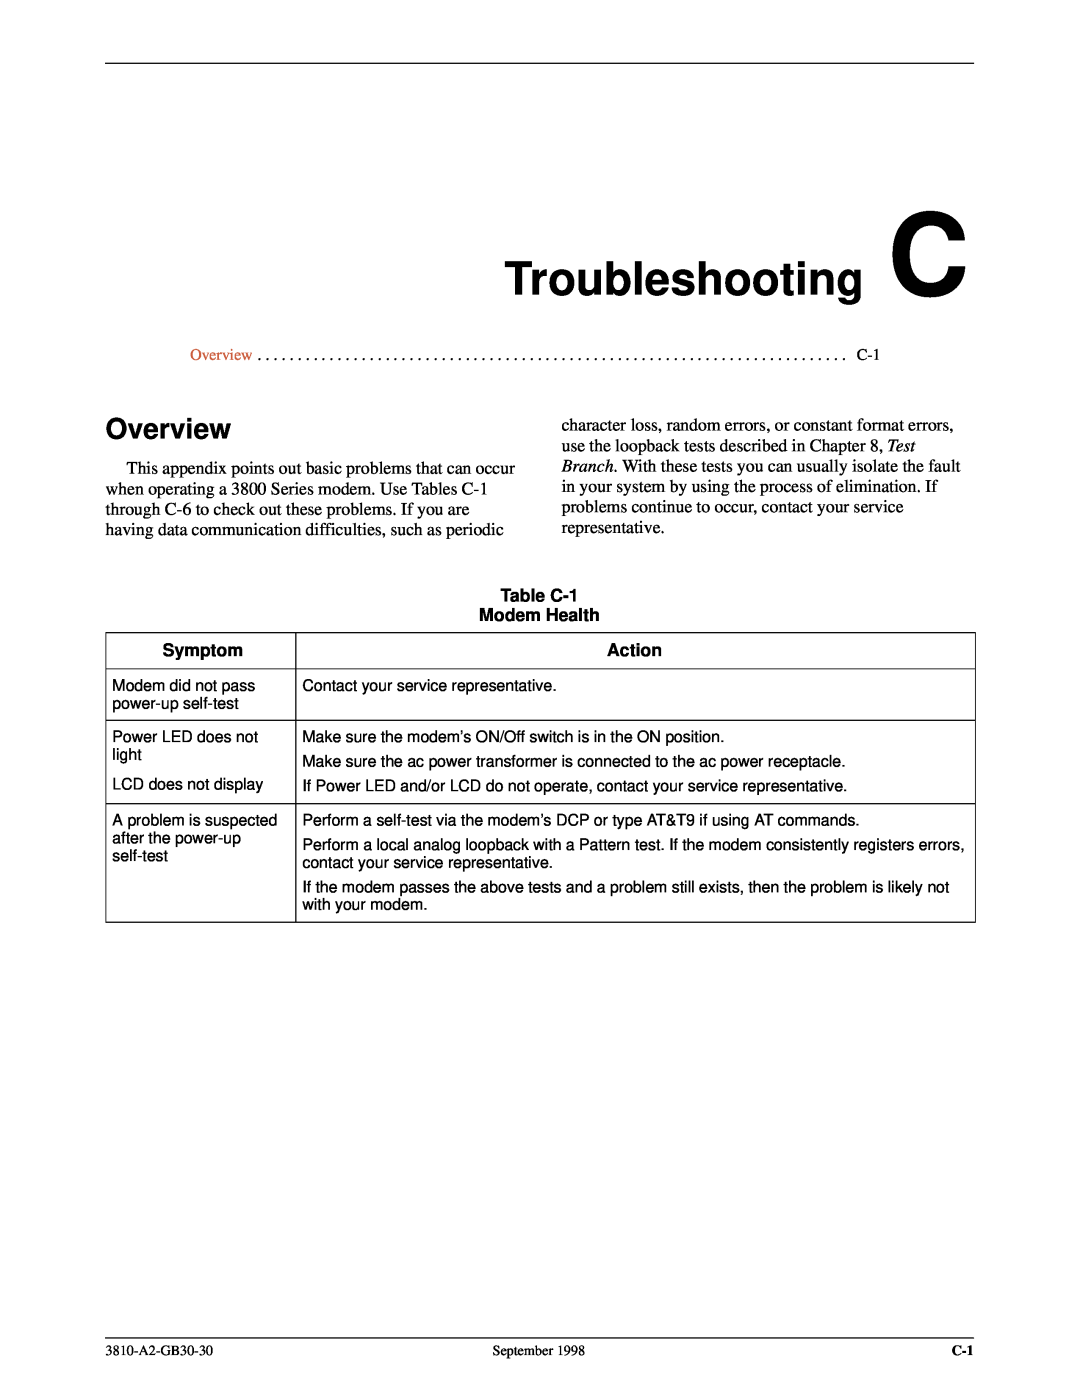 Paradyne 3800 manual Troubleshooting C, Table C-1, Modem Health, Symptom, Action, Overview 